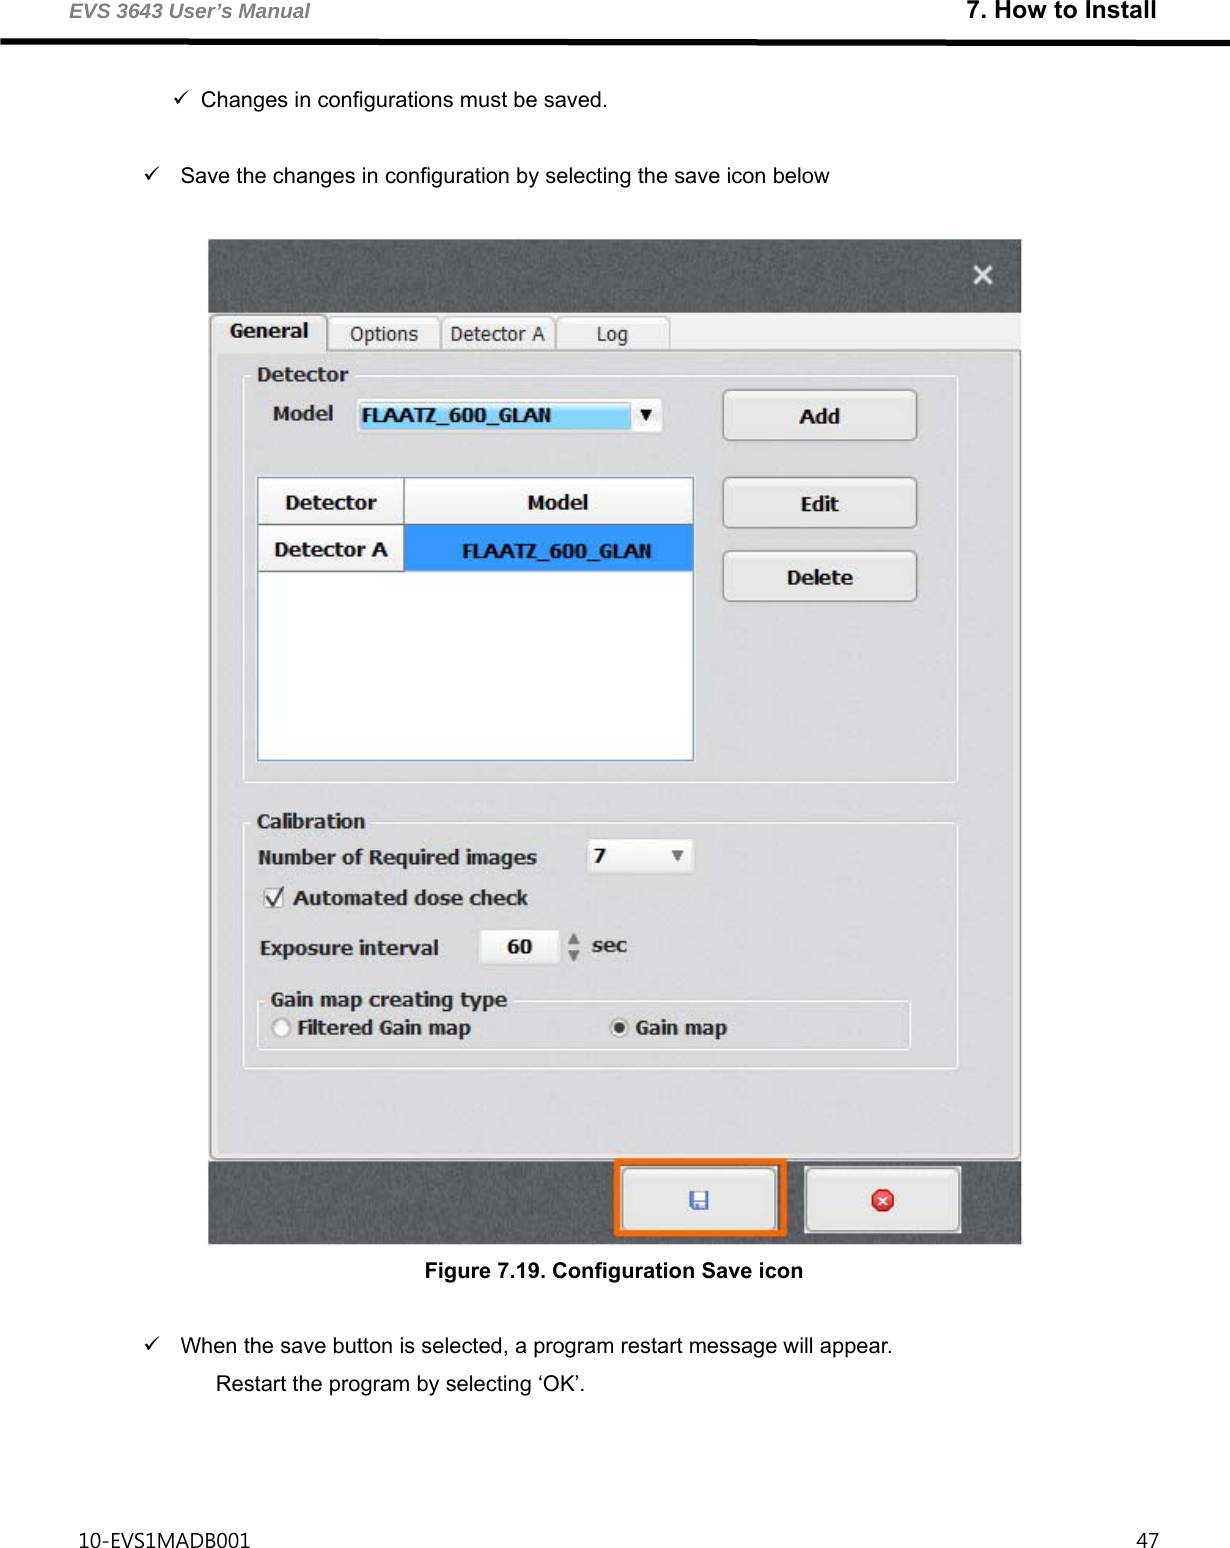 EVS 3643 User’s Manual                                                               7. How to Install 10-EVS1MADB001                                                                                     47      Changes in configurations must be saved.    Save the changes in configuration by selecting the save icon below   Figure 7.19. Configuration Save icon    When the save button is selected, a program restart message will appear.   Restart the program by selecting ‘OK’.  